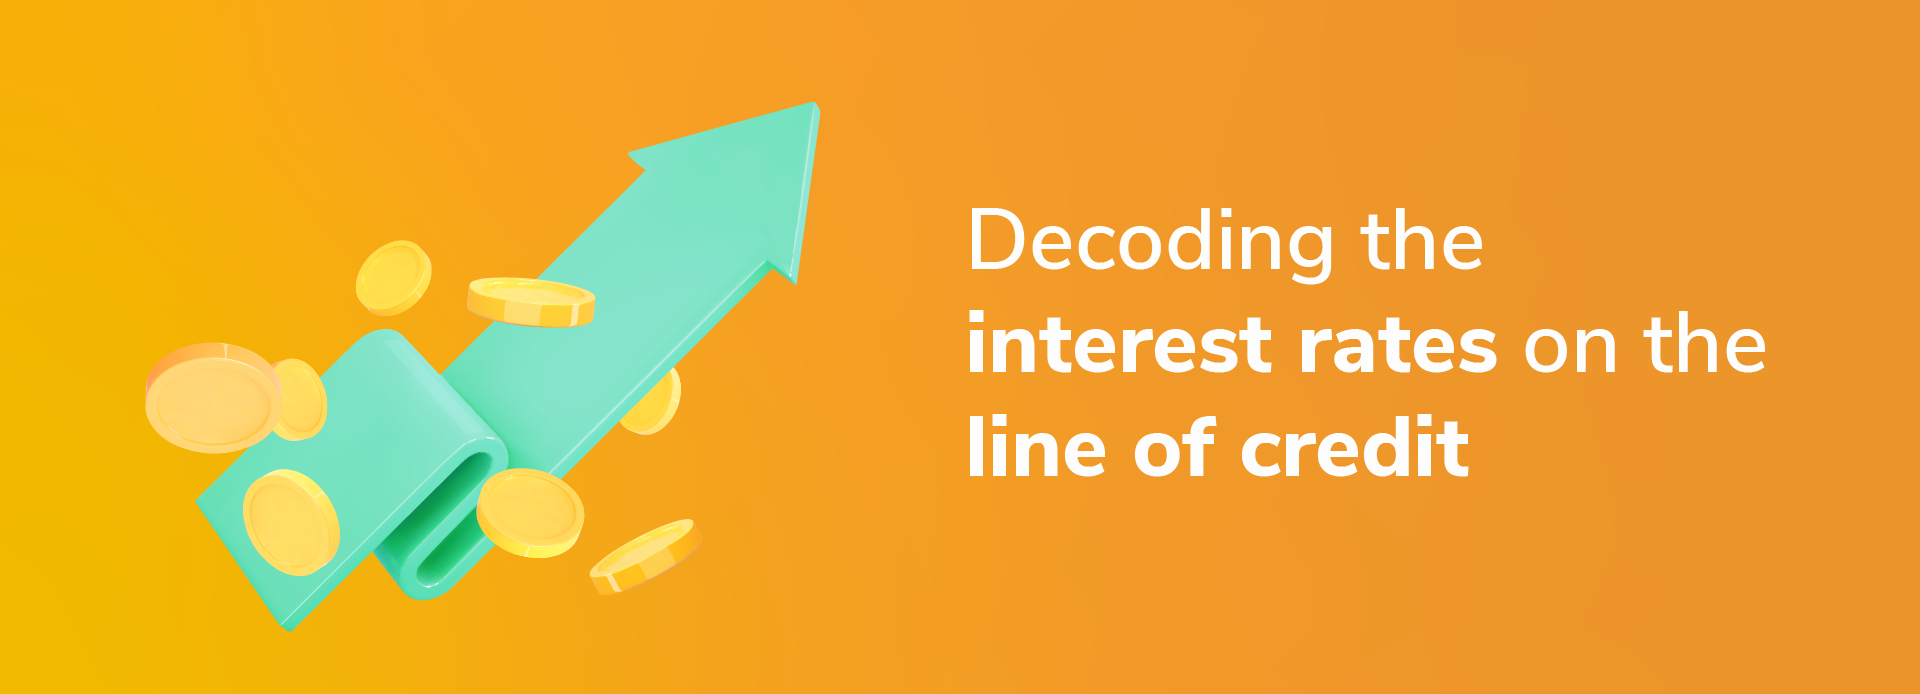 Decoding the interest rates on the line of credit: What you need to know 